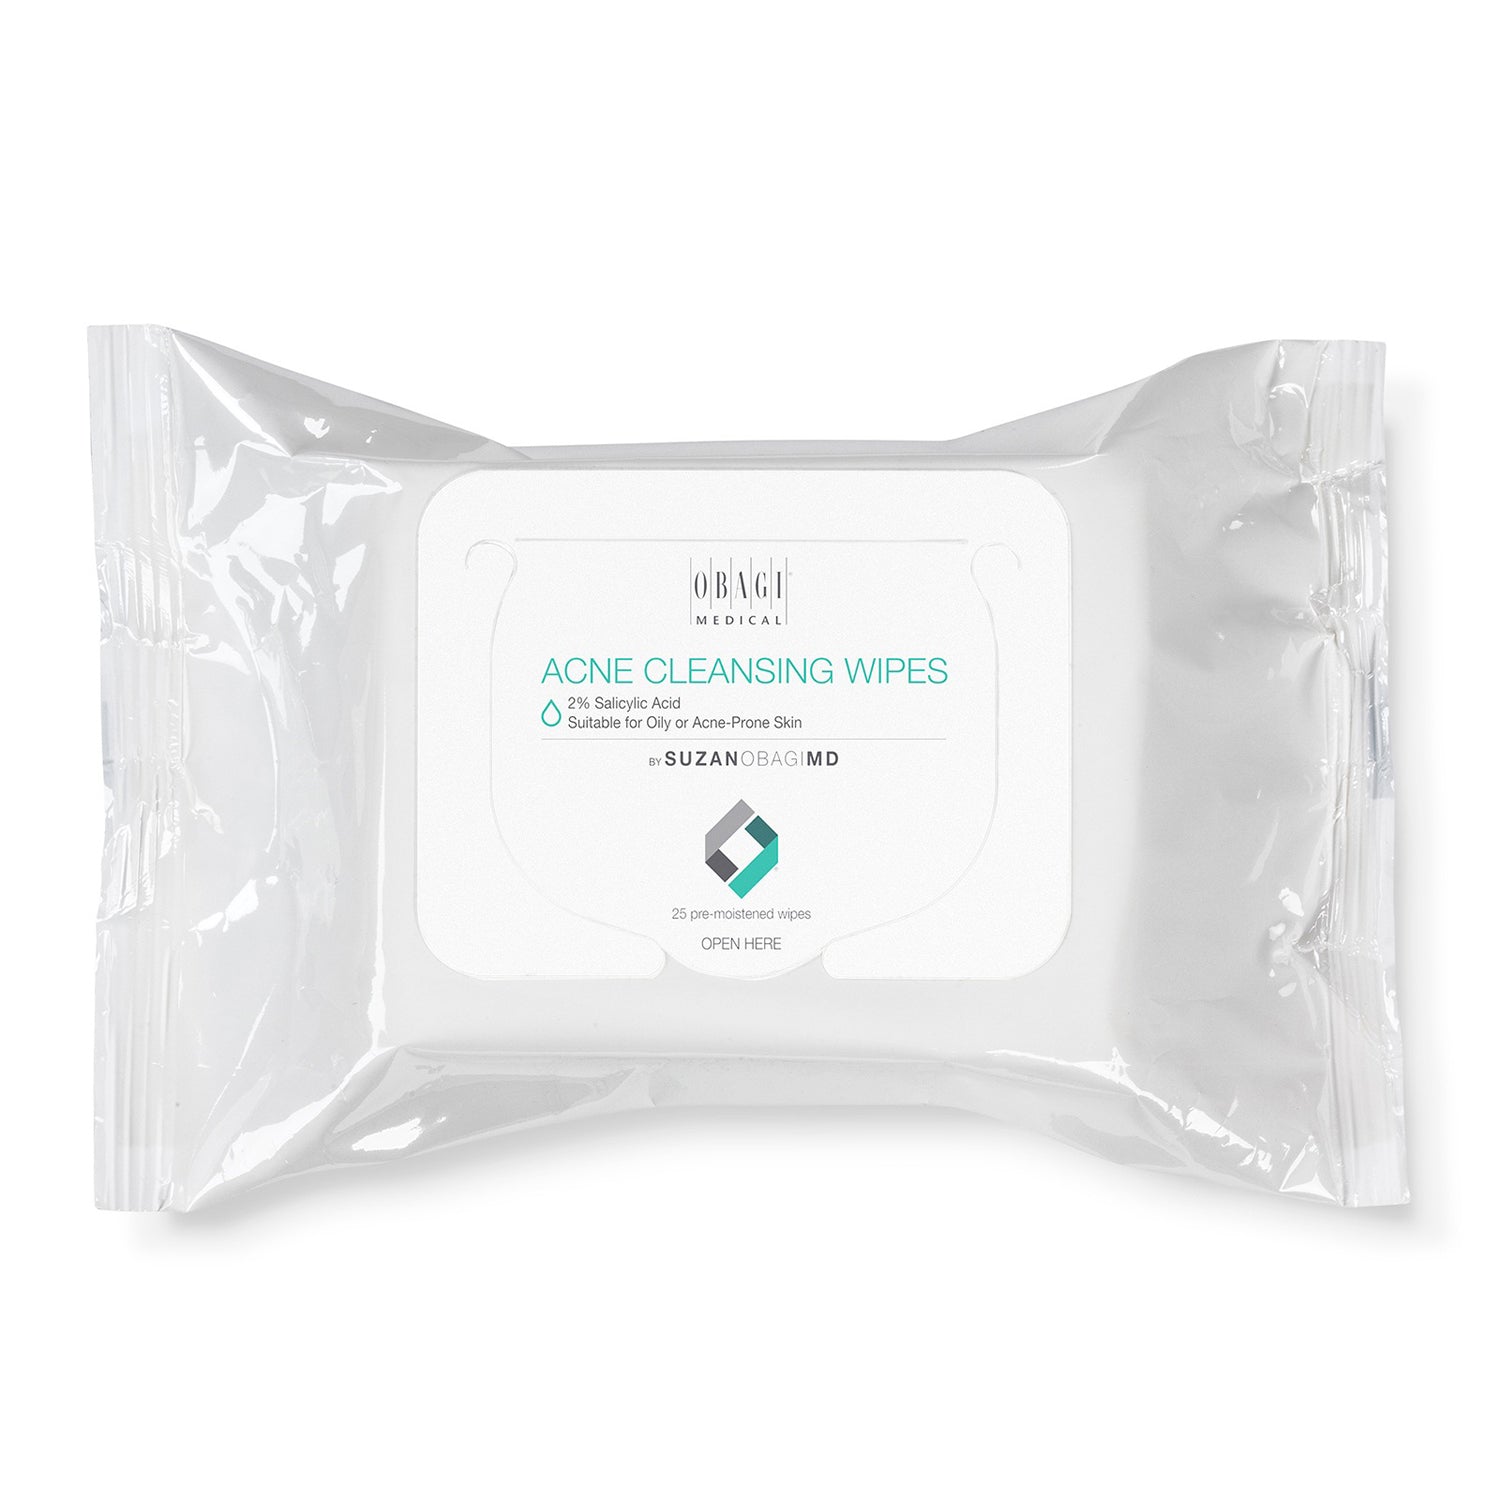 Obagi medical suzanobagimd acne cleansing wipes from MyExceptionalSkinCare.com